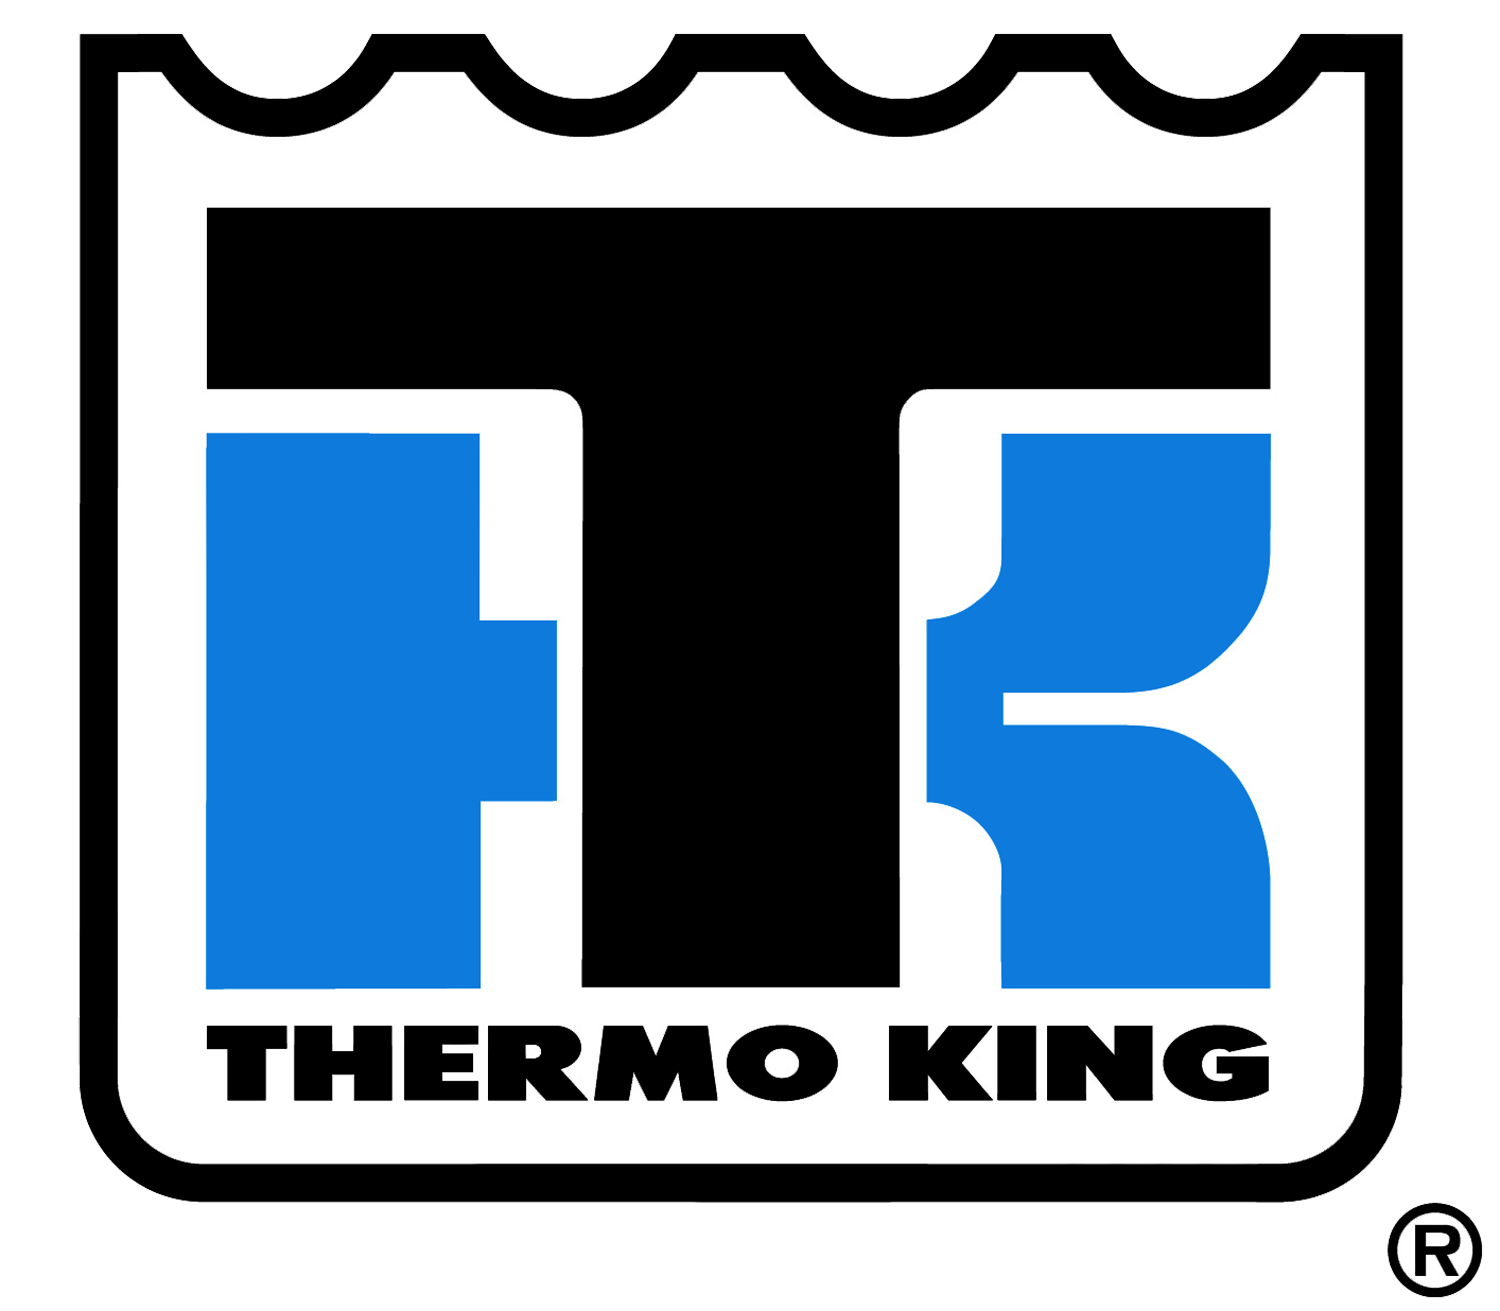 thermo king crest